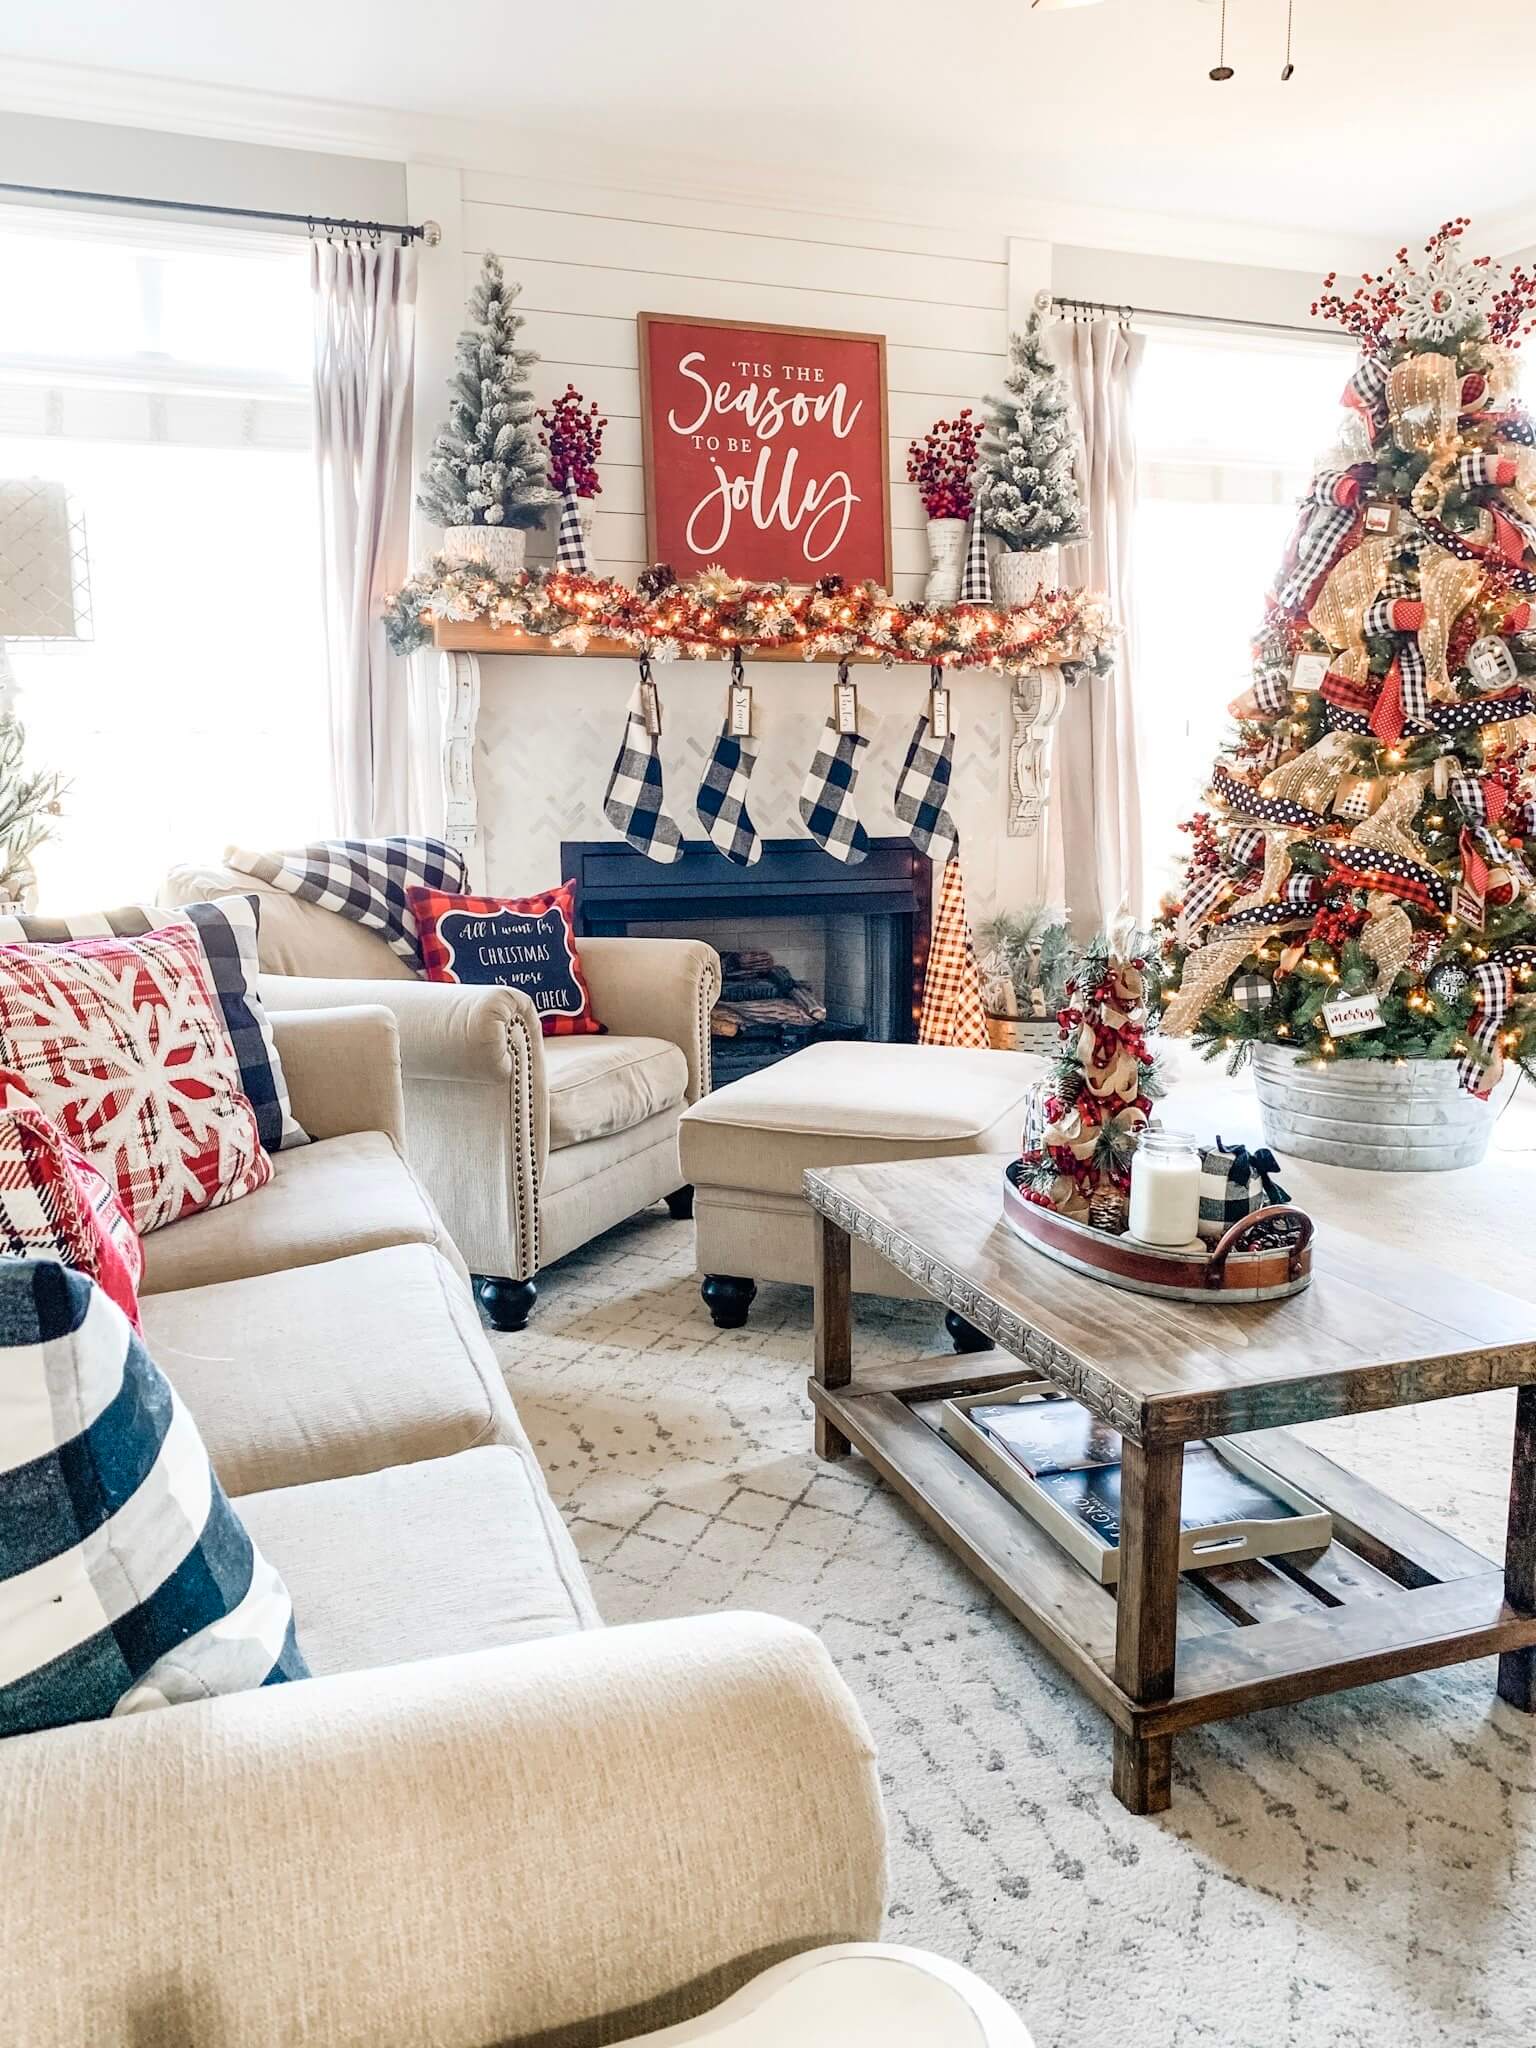 Over 100 fireplace Christmas decor ideas perfect for your home. I am sharing Christmas mantel decor in all its styles too!